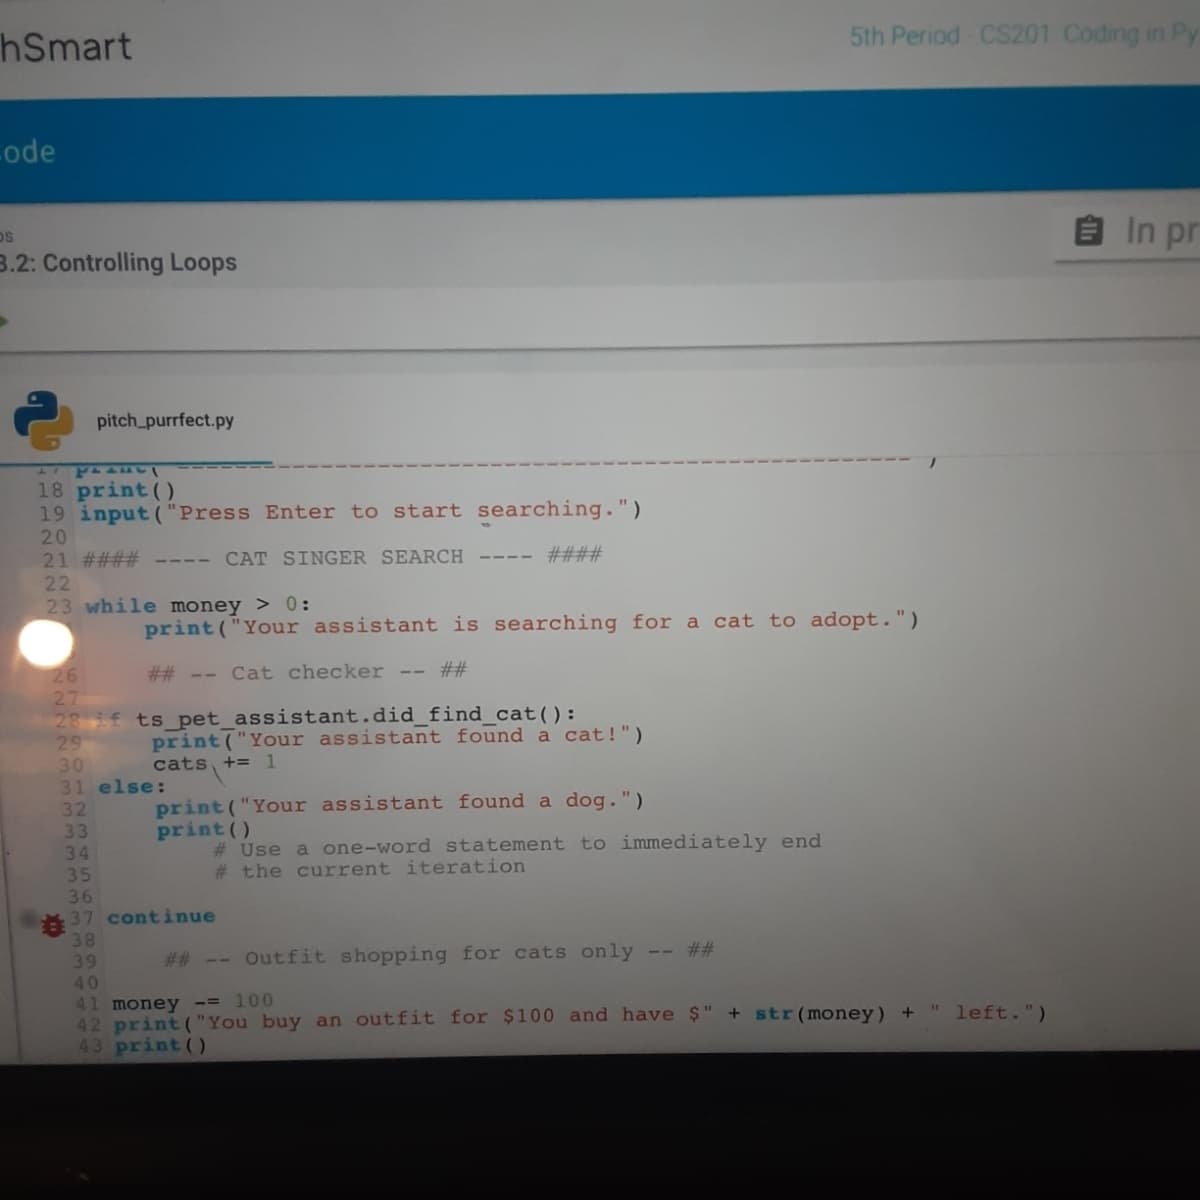 hSmart
5th Period CS201 Coding in Py
-ode
In pr
3.2: Controlling Loops
pitch_purrfect.py
18 print ()
19 input ("Press Enter to start searching.")
20
21 #### ---- CAT SINGER SEARCH
22
23 while money > 0:
####
print ("Your assistant is searching for a cat to adopt.")
26
27
28 if ts pet_assistant.did_find_cat():
29
30
31 else:
## -- Cat checker -- ##
print ("Your assistant found a cat!")
cats, += 1
32
33
34
print ("Your assistant found a dog.")
print ()
# Use a one-word statement to immediately end
# the current iteration
36
37 continue
38
39
-- ##
# # -- Outfit shopping for cats only
40
41 money -= 100
42 print ("You buy an outfit for $100 and have $" + str(money) +
43 print()
left.")
wwww.wN
